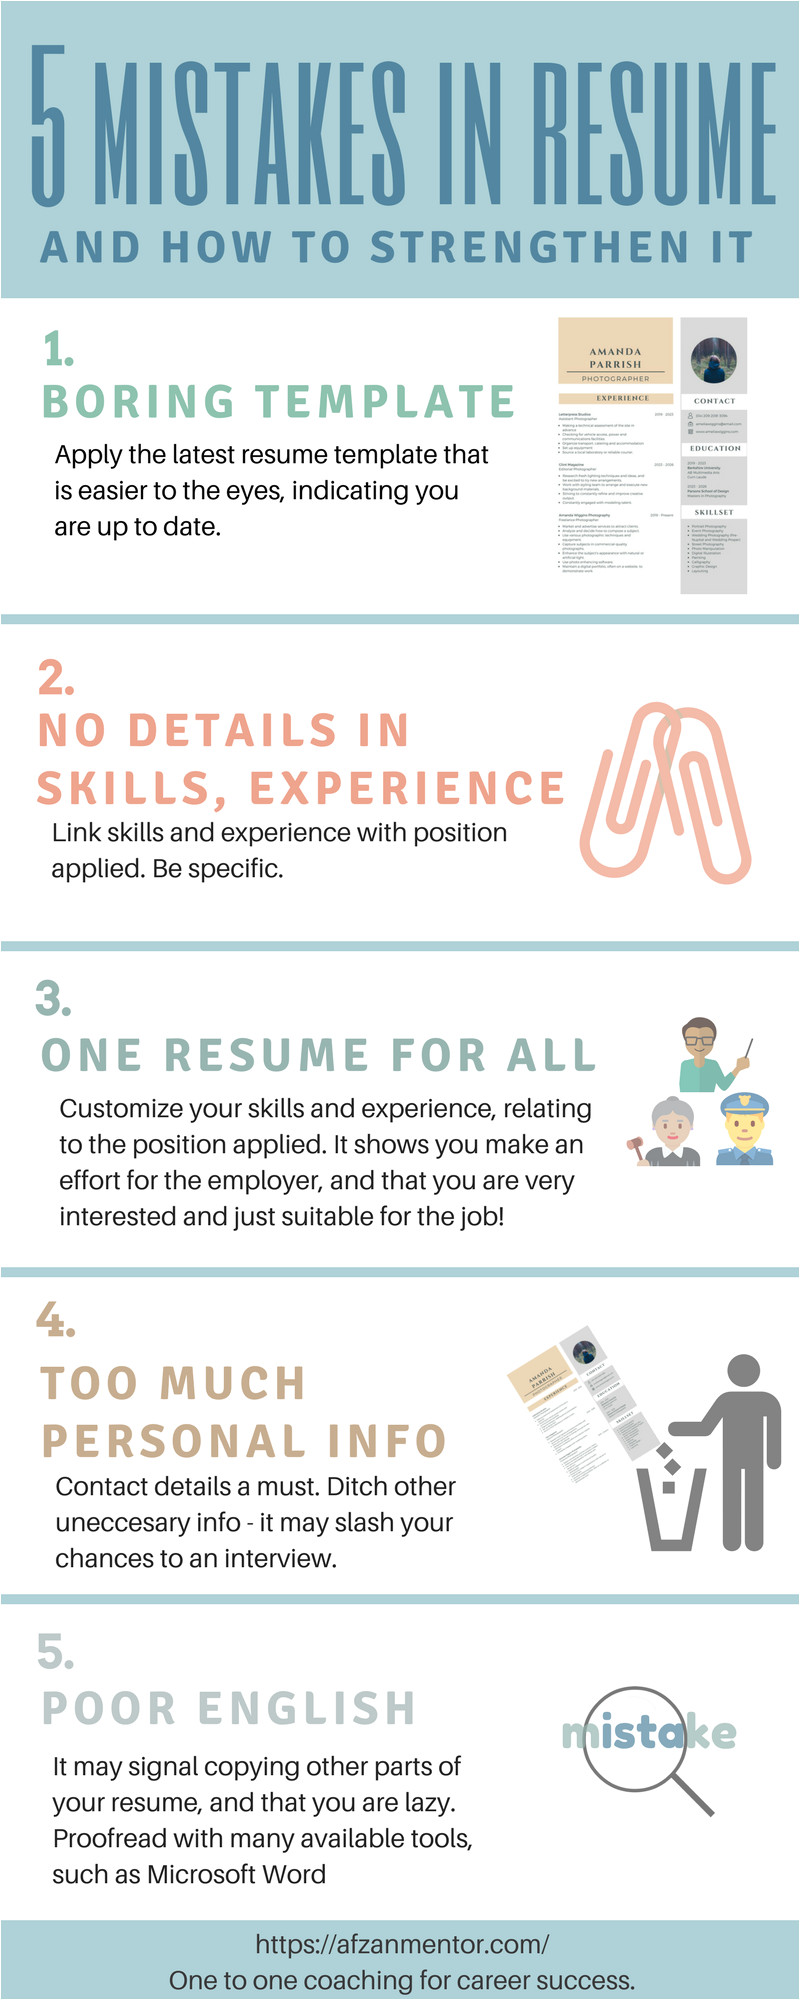 5 mistakes in resumes that slash your chances to an interview and how to strengthen your resume